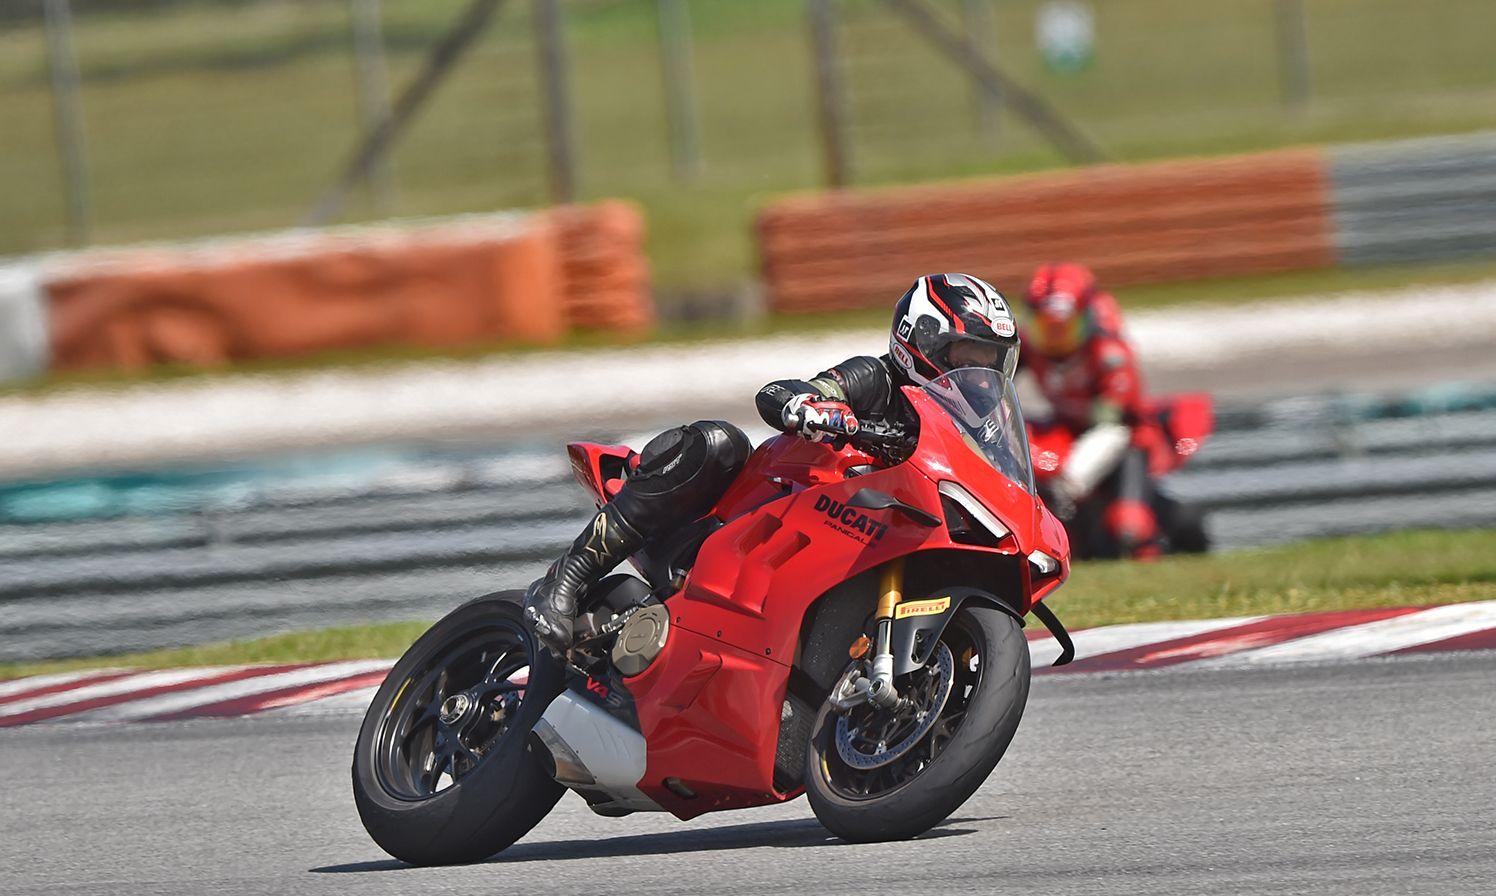 Latest Reviews on Panigale V4 